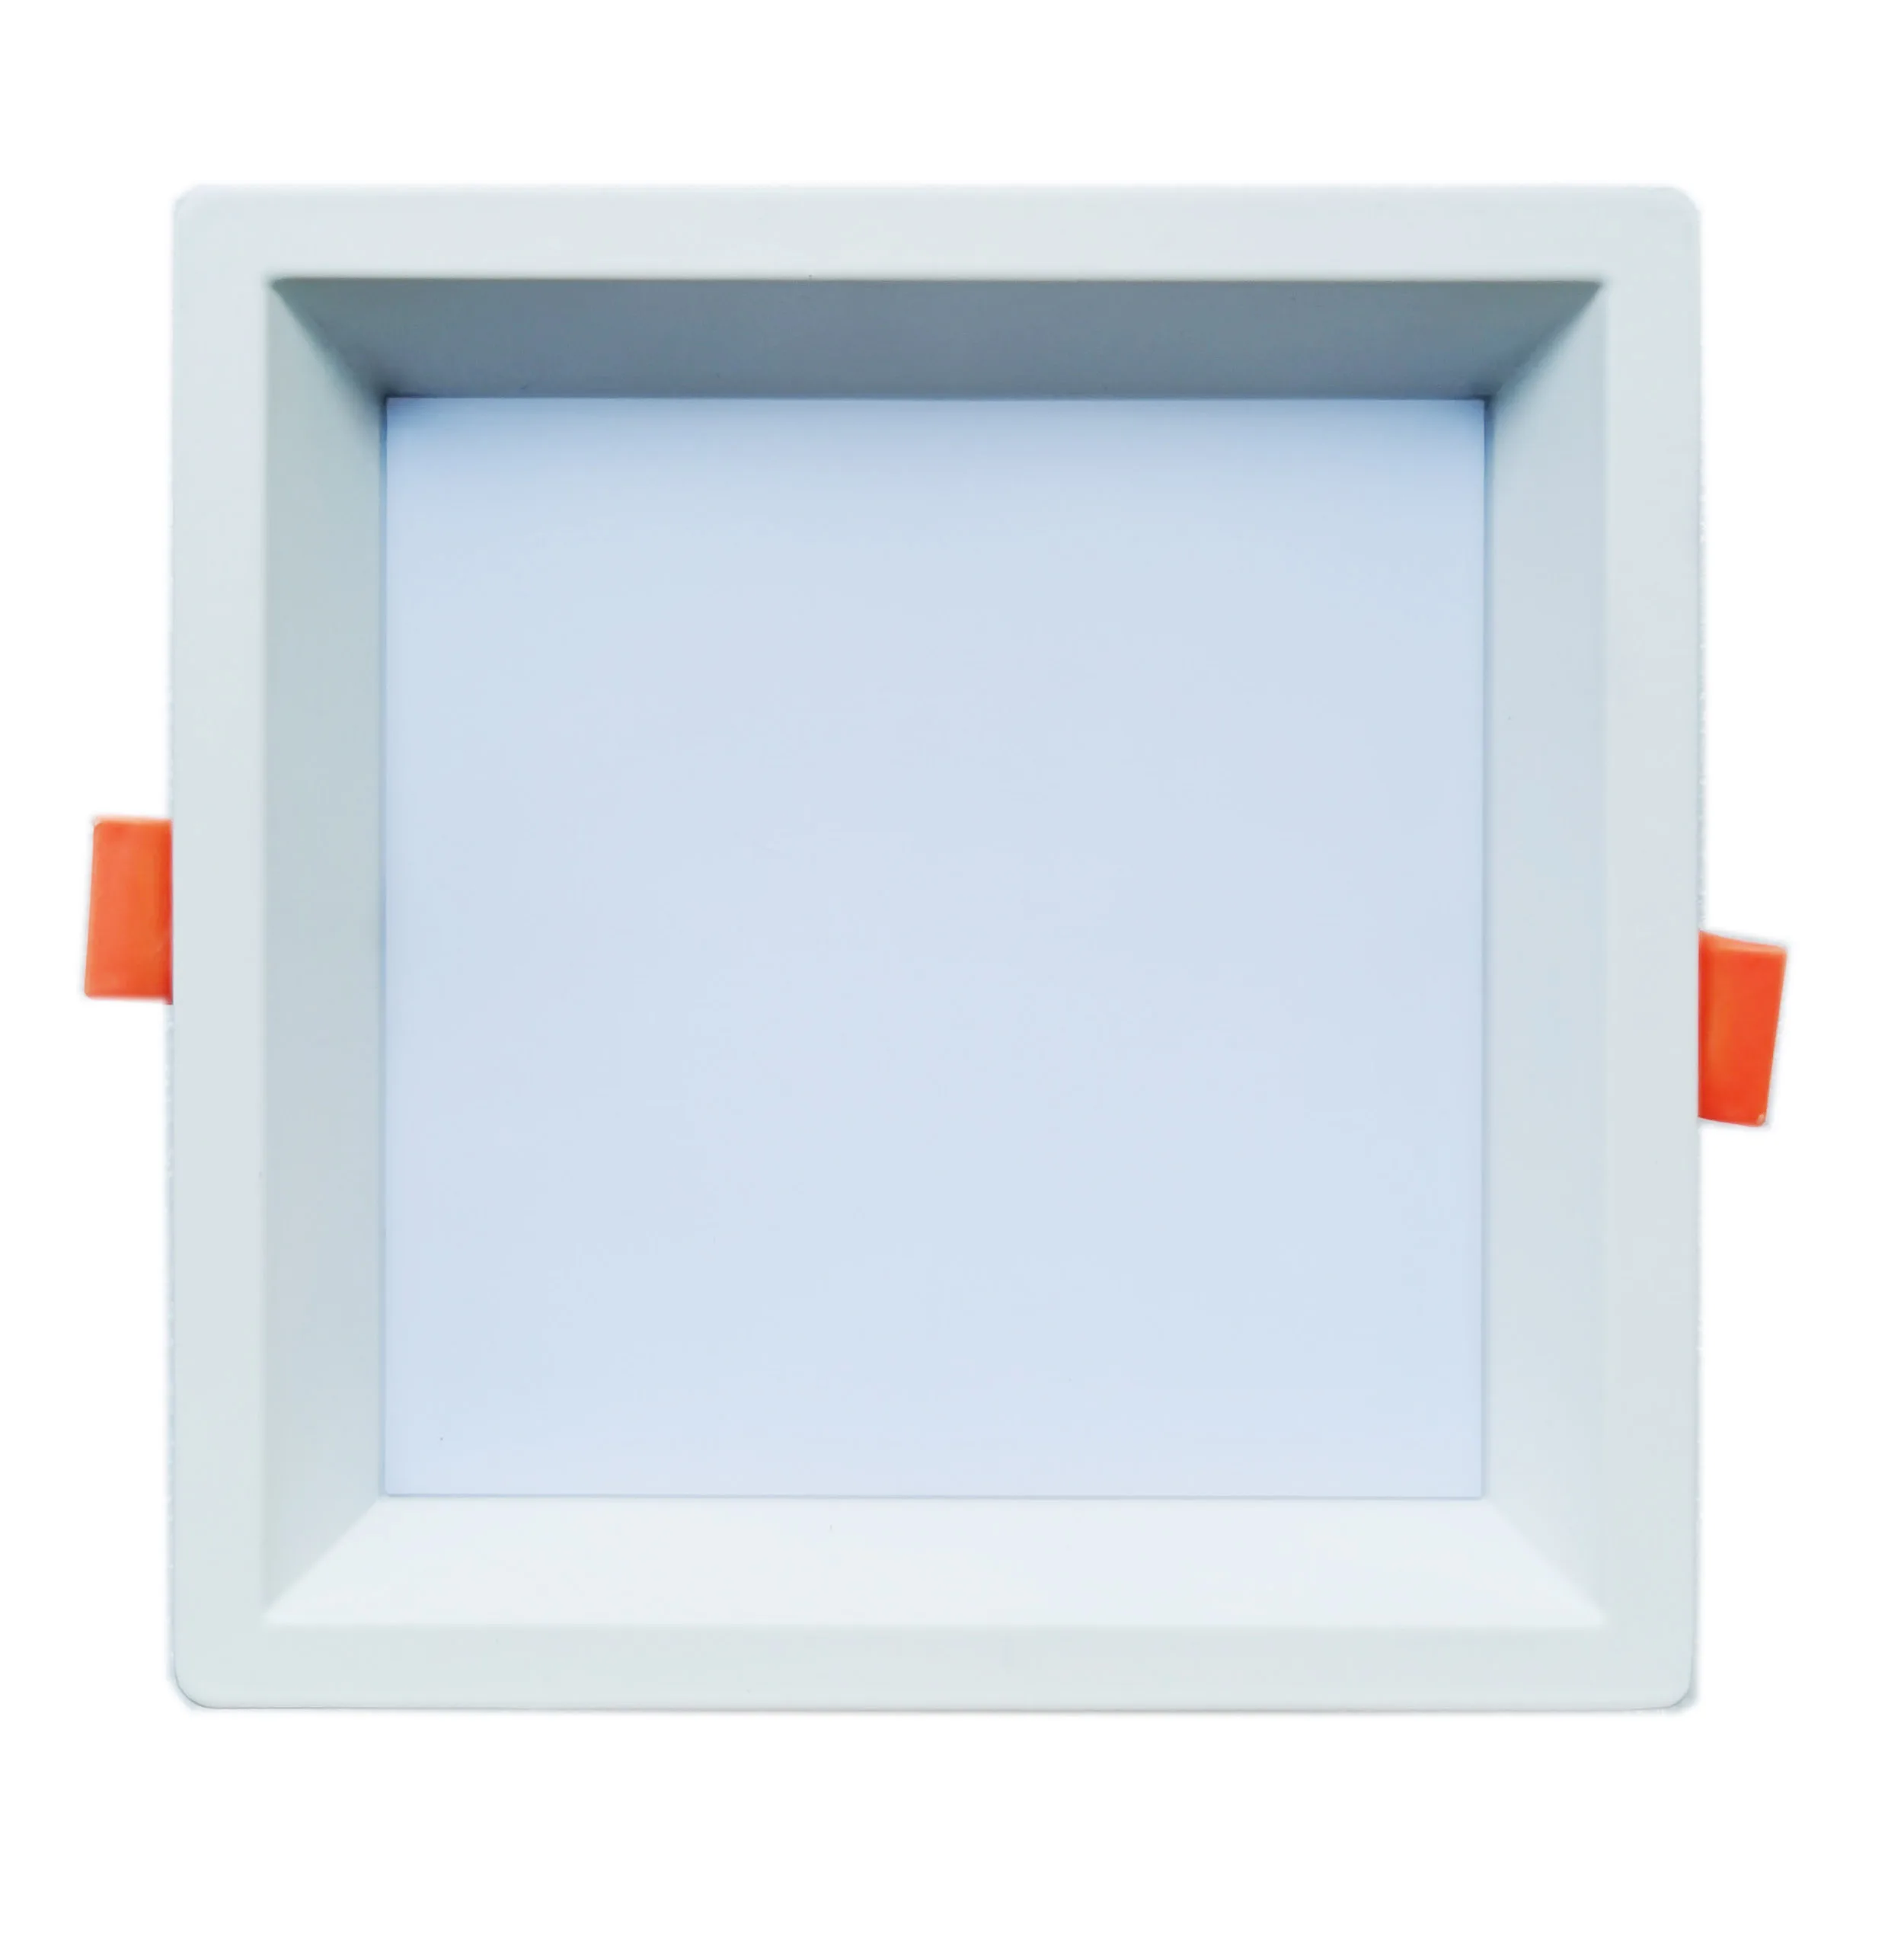 20W anti-dazzle Square led downlight, Recessed down light 3 years warranty